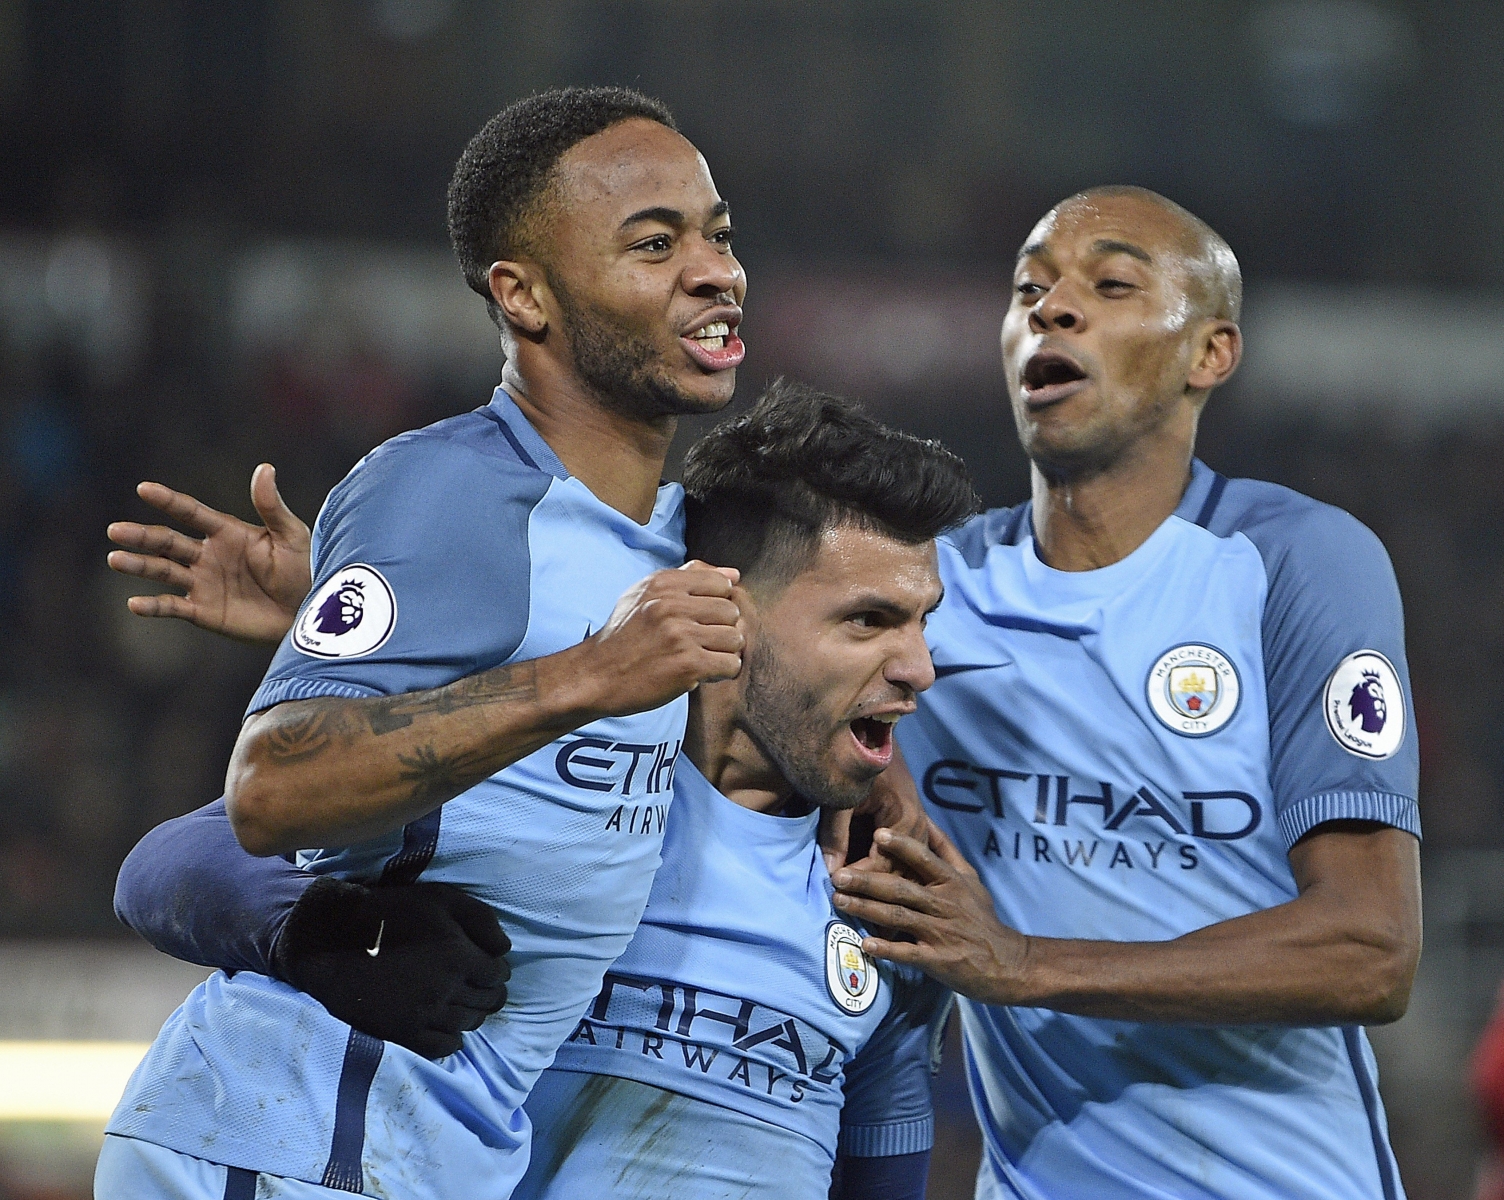 epa05791725 (L-R) Manchester City's Raheem Sterling, Sergio Aguero and Fernadinho celebrate the 2-0 lead during the English Premier League soccer match between AFC Bournemouth and Manchester City at the Vitalitiy stadium, Bournemouth, Britain, 13 February 2017.  EPA/GERRY PENNY EDITORIAL USE ONLY. No use with unauthorized audio, video, data, fixture lists, club/league logos or 'live' services. Online in-match use limited to 75 images, no video emulation. No use in betting, games or single club/league/player publications.